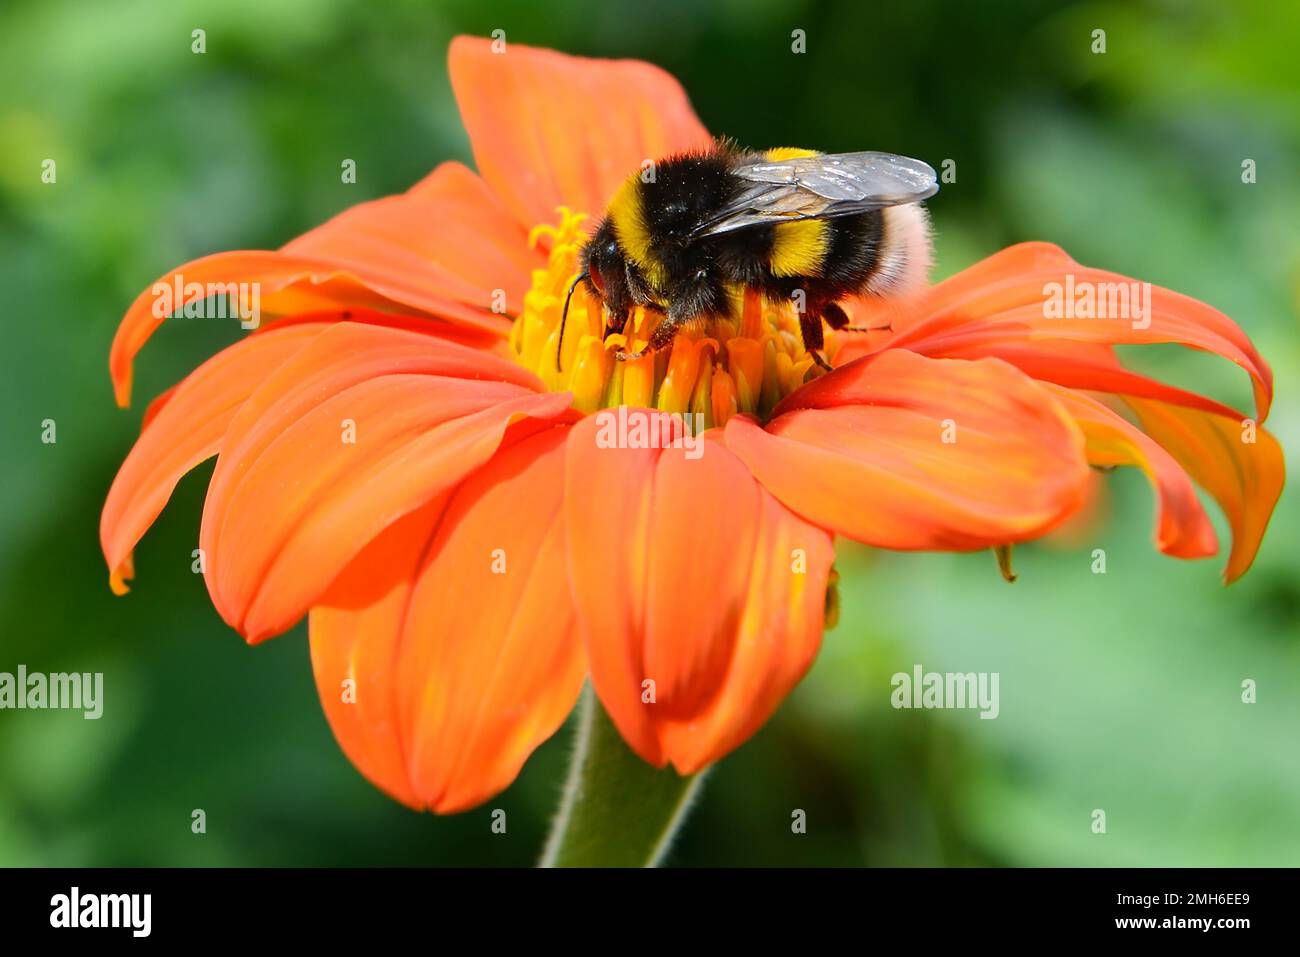 Bumble bee pollinating a flower Stock Photo